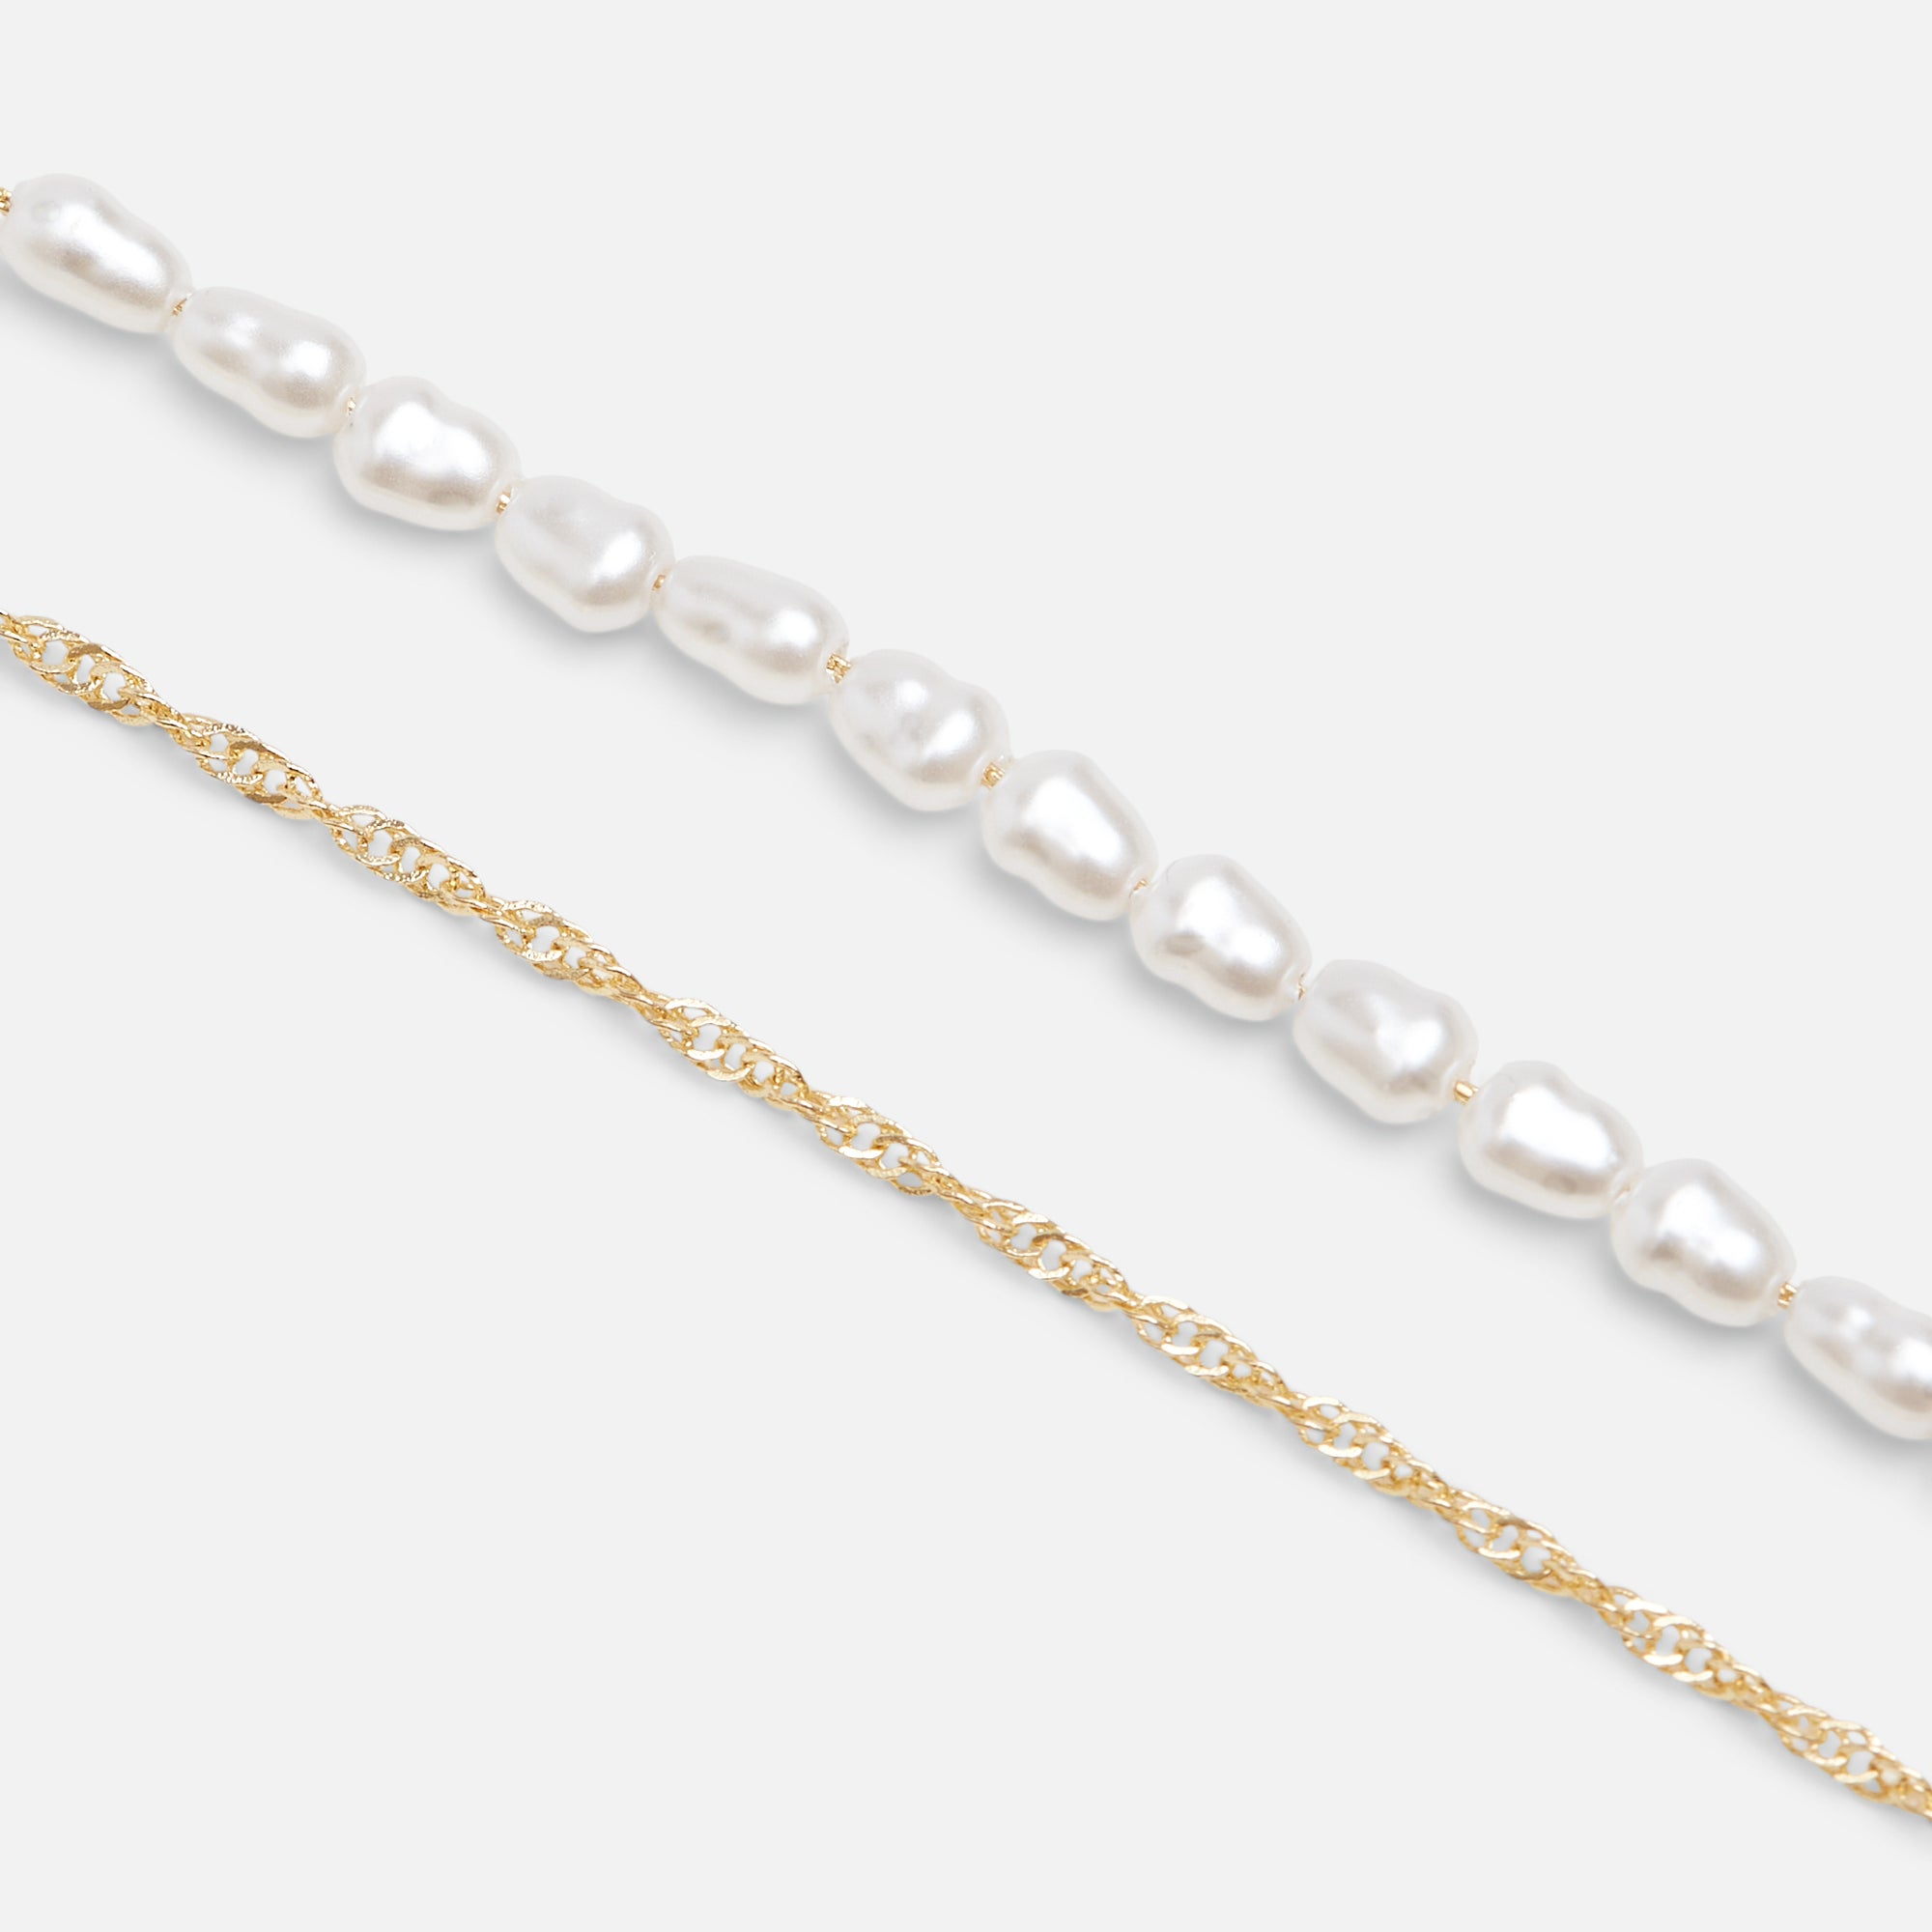 Double chain short necklace with pearls